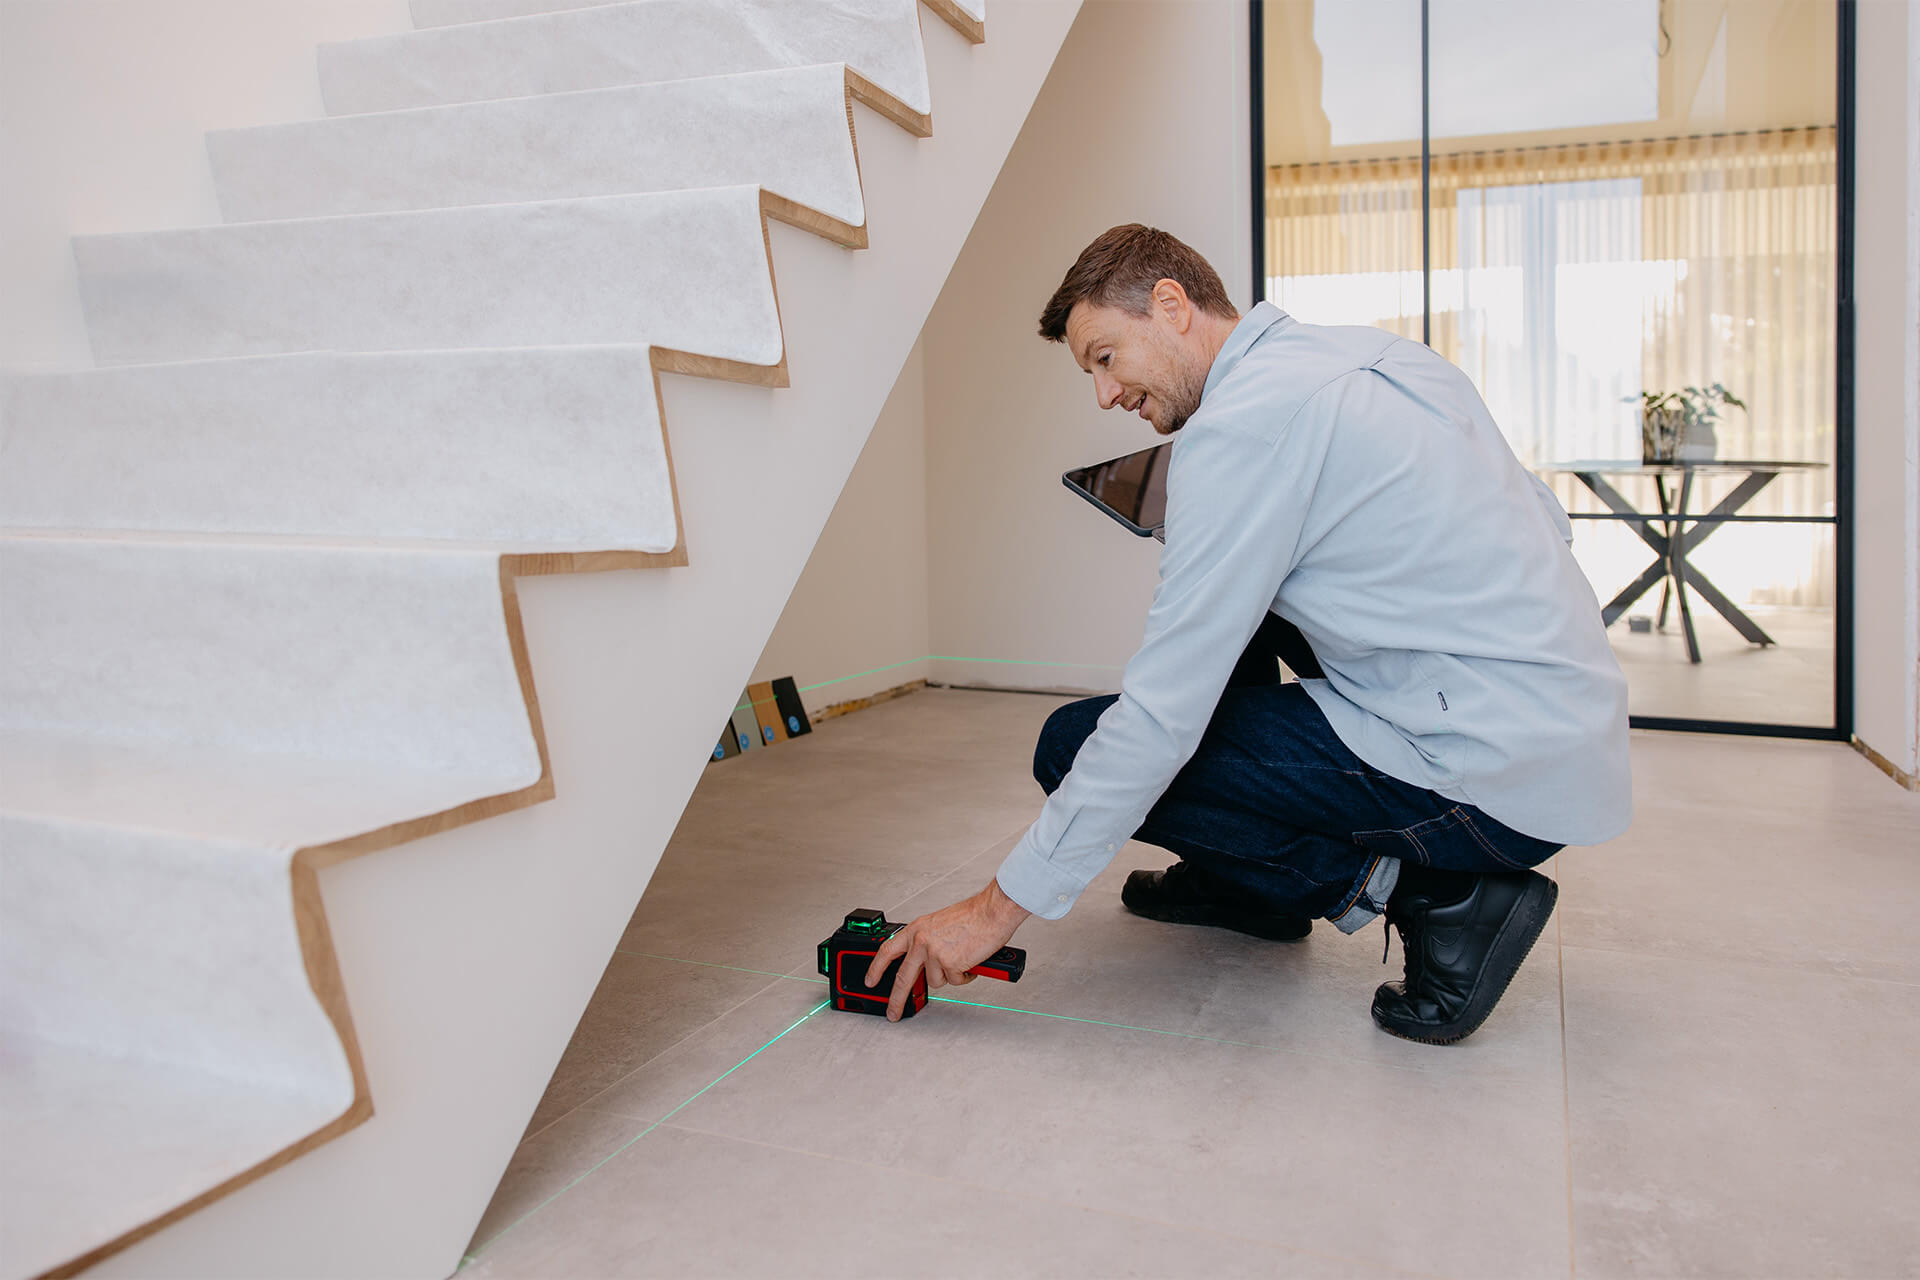 The measuring service measures the space under the stairs for a custom-made stair cupboard.